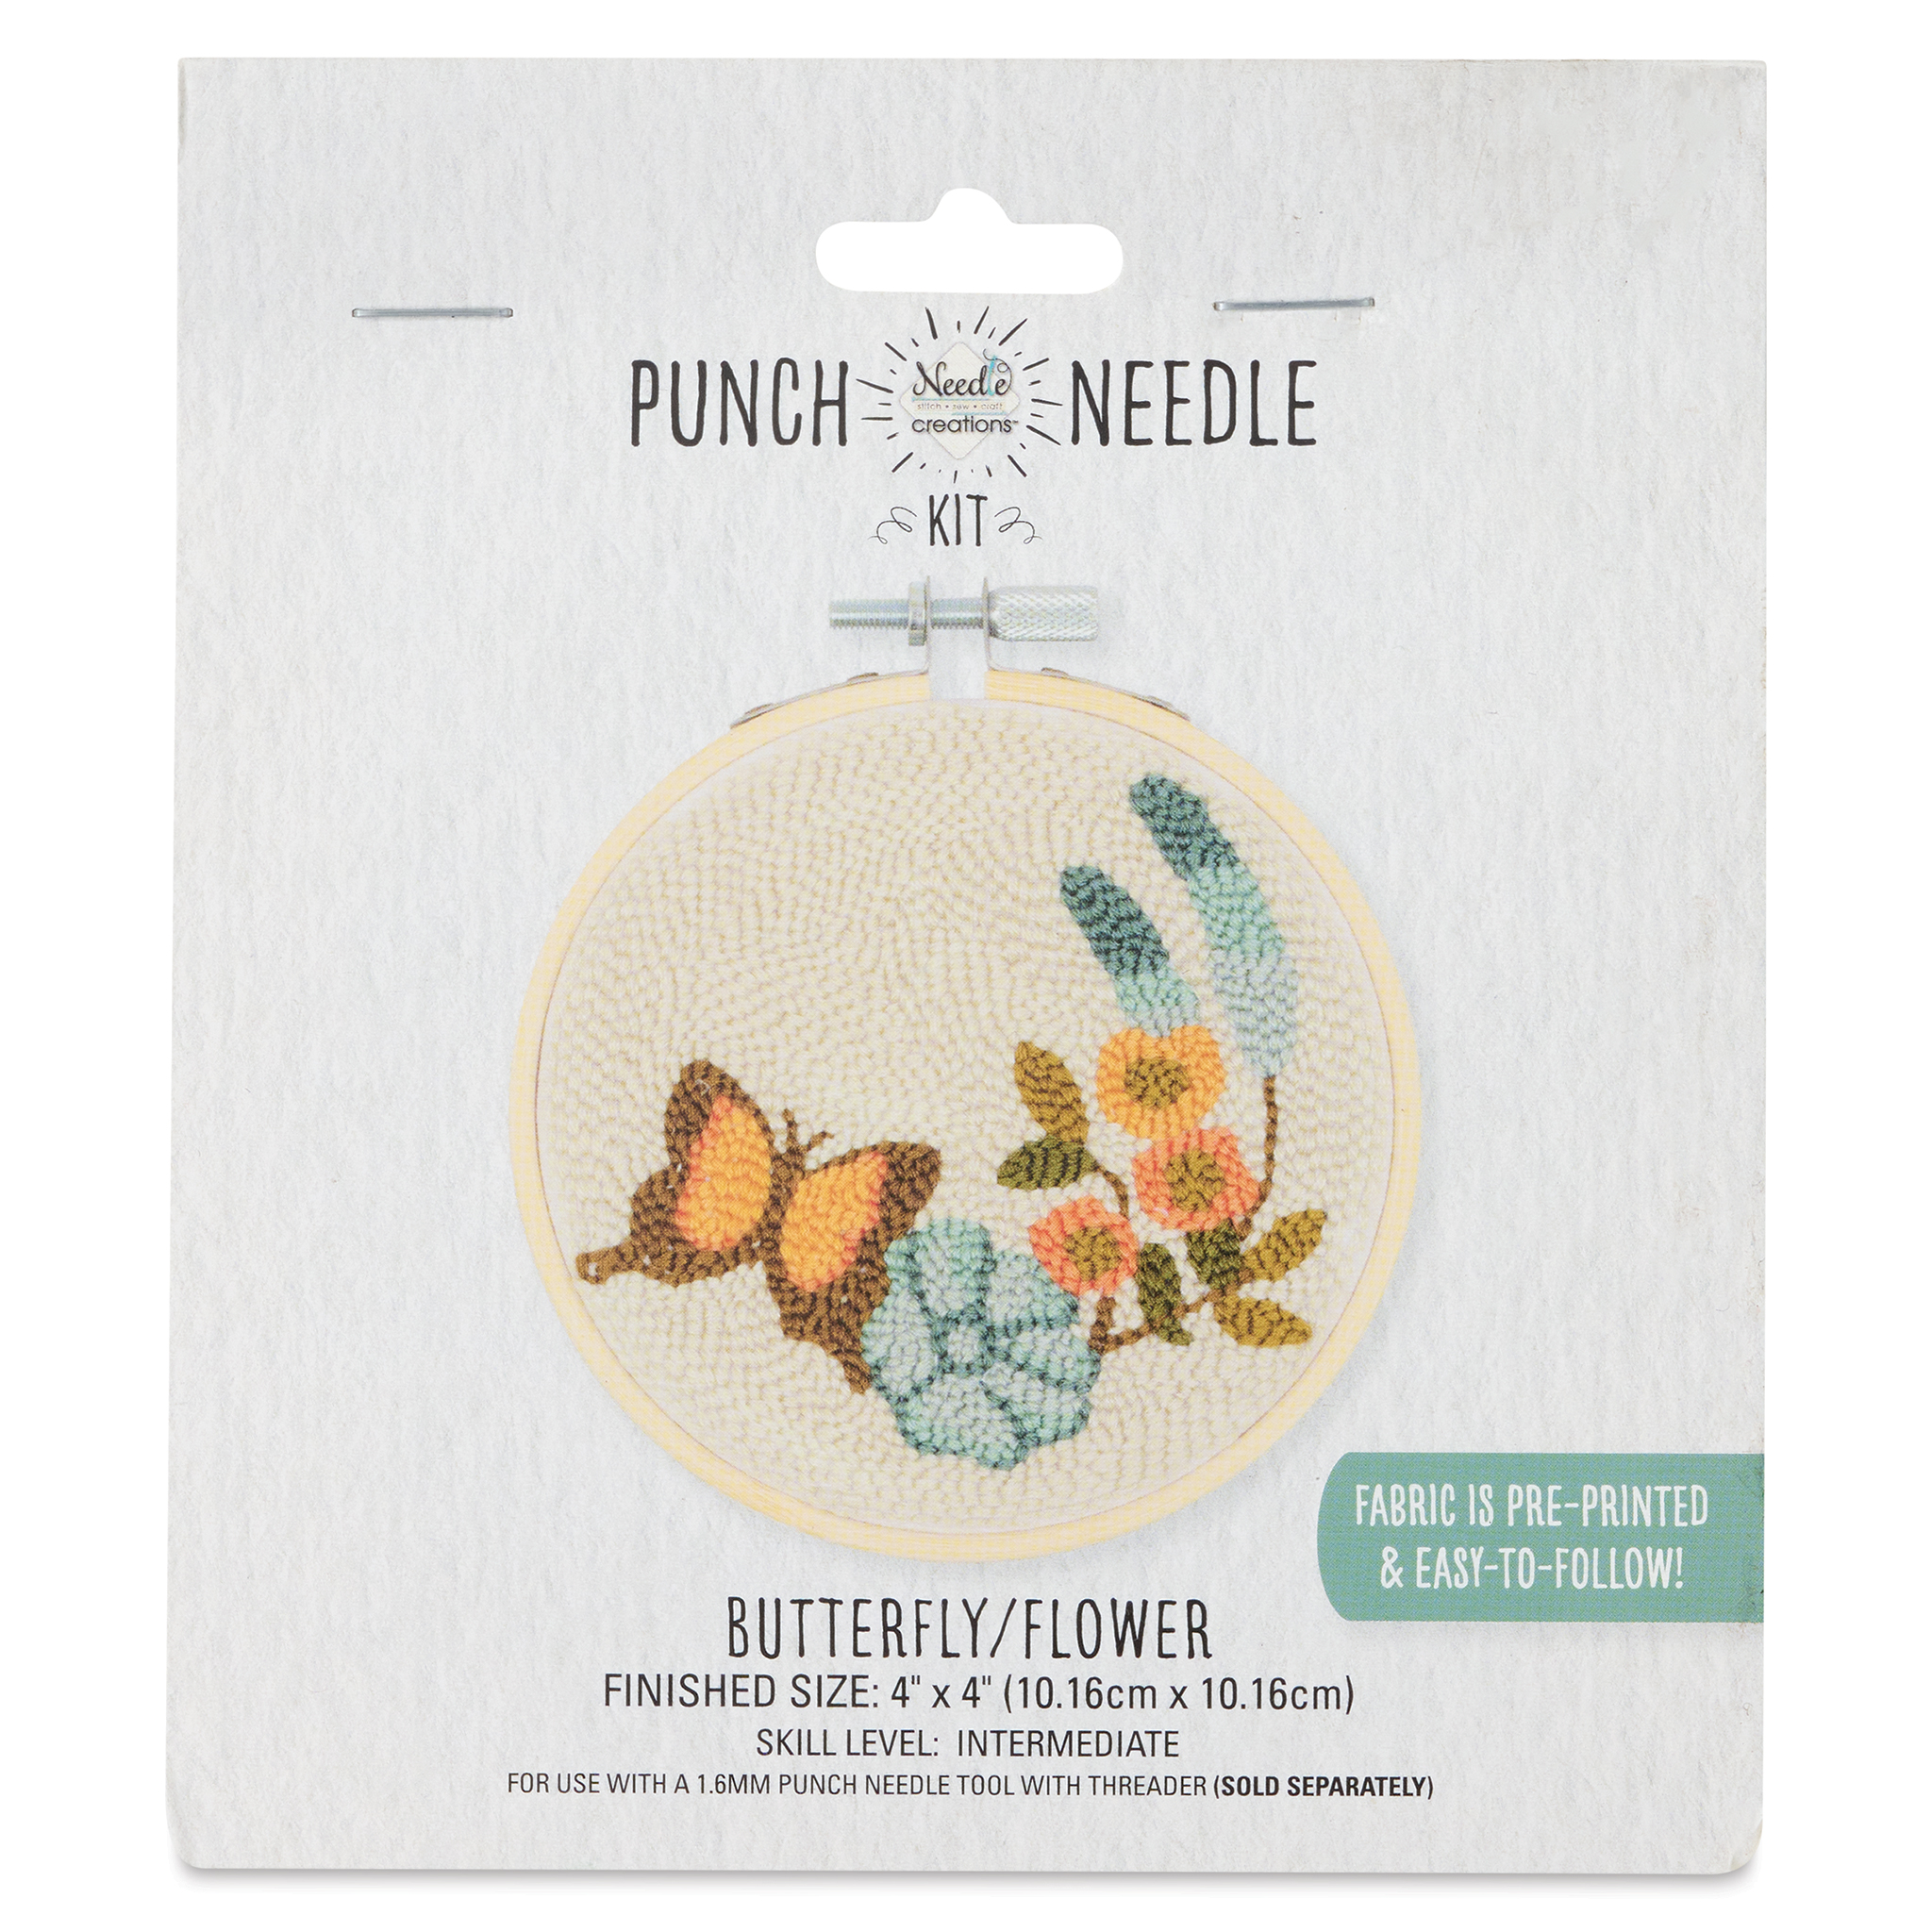 Needle Creations Needle Punch Kit - Butterfly and Flower, 4